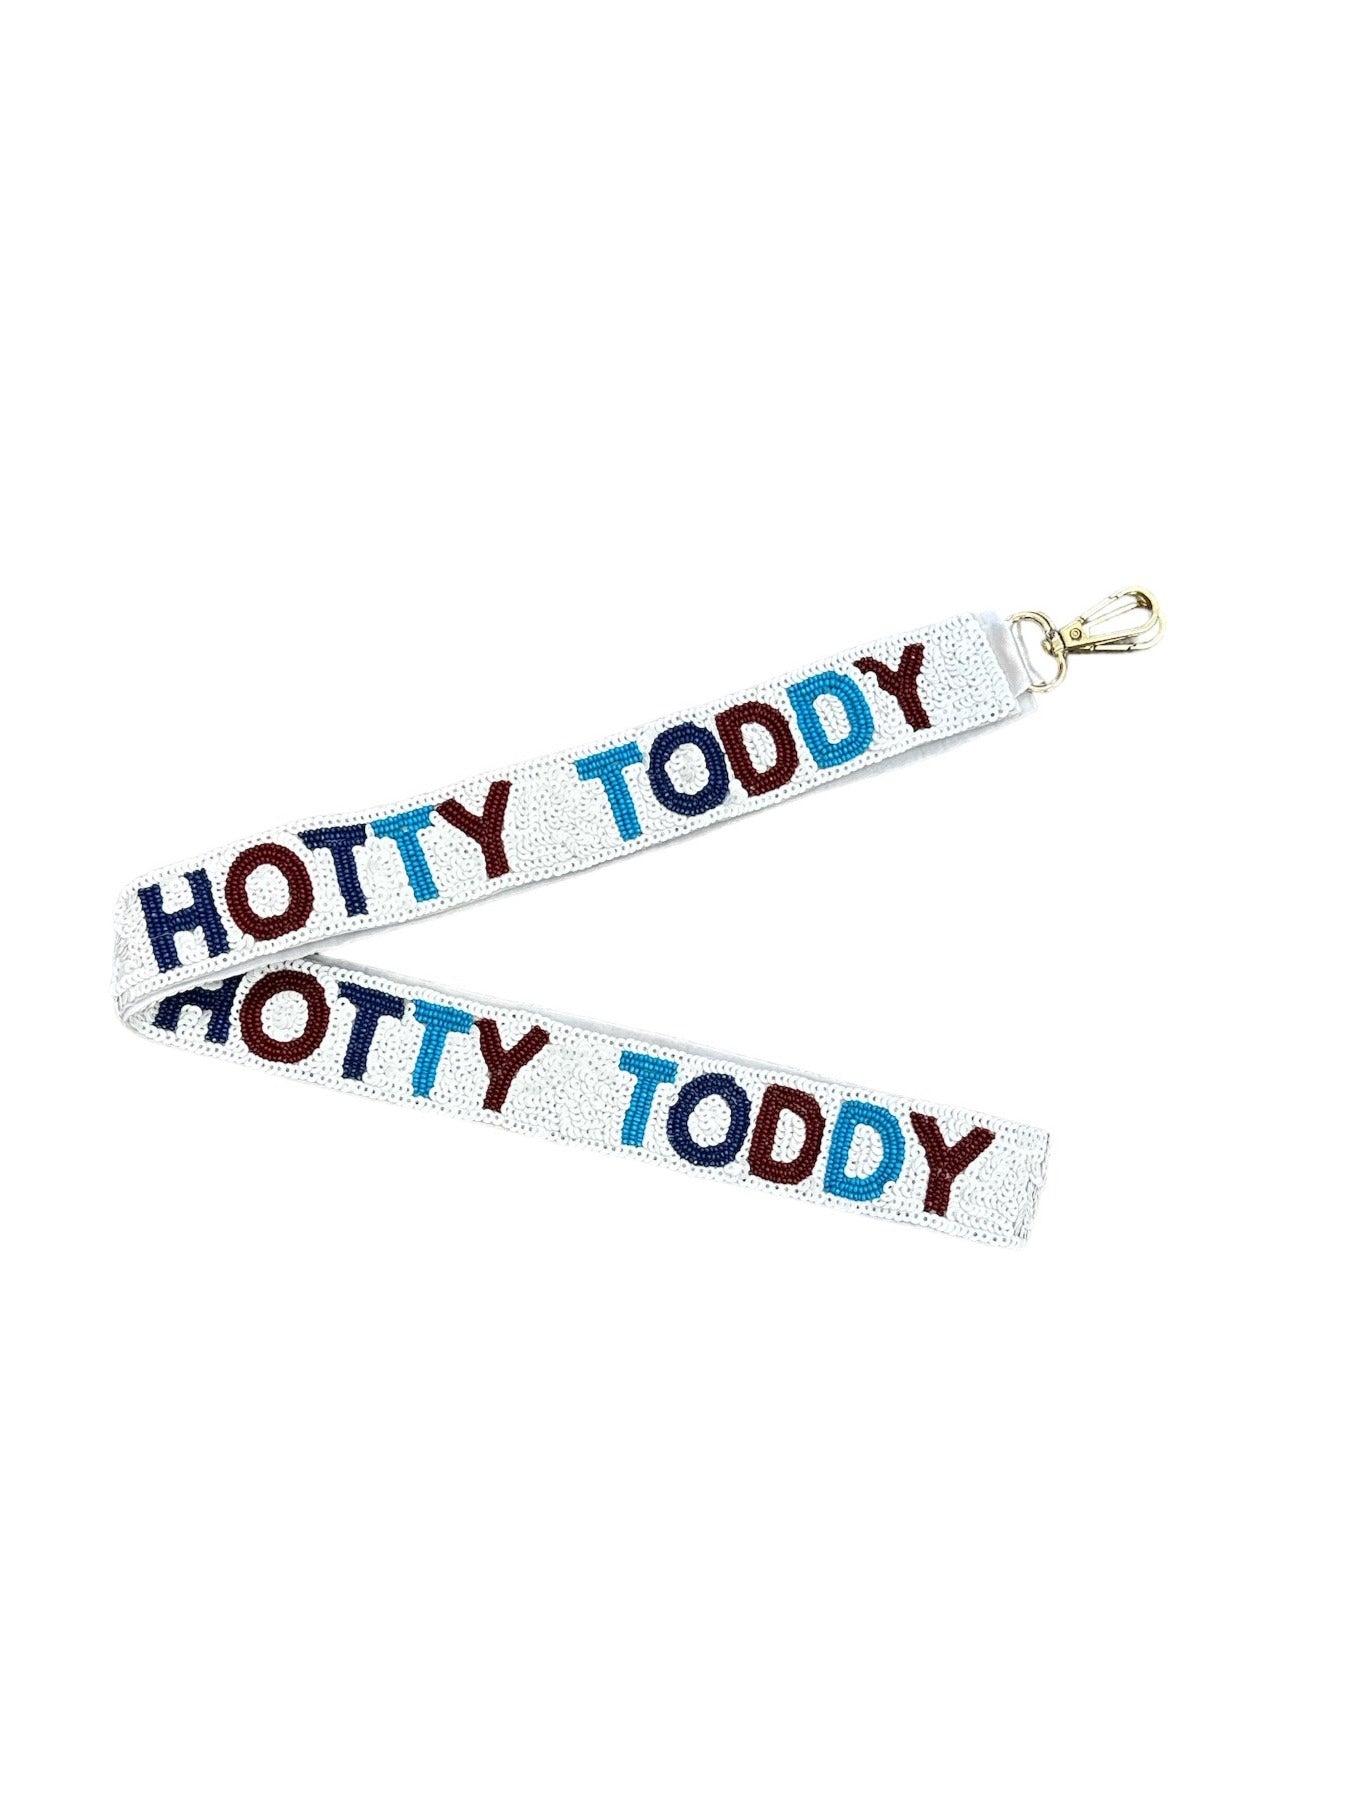 Sequin Bead Bag Strap - Hotty Toddy